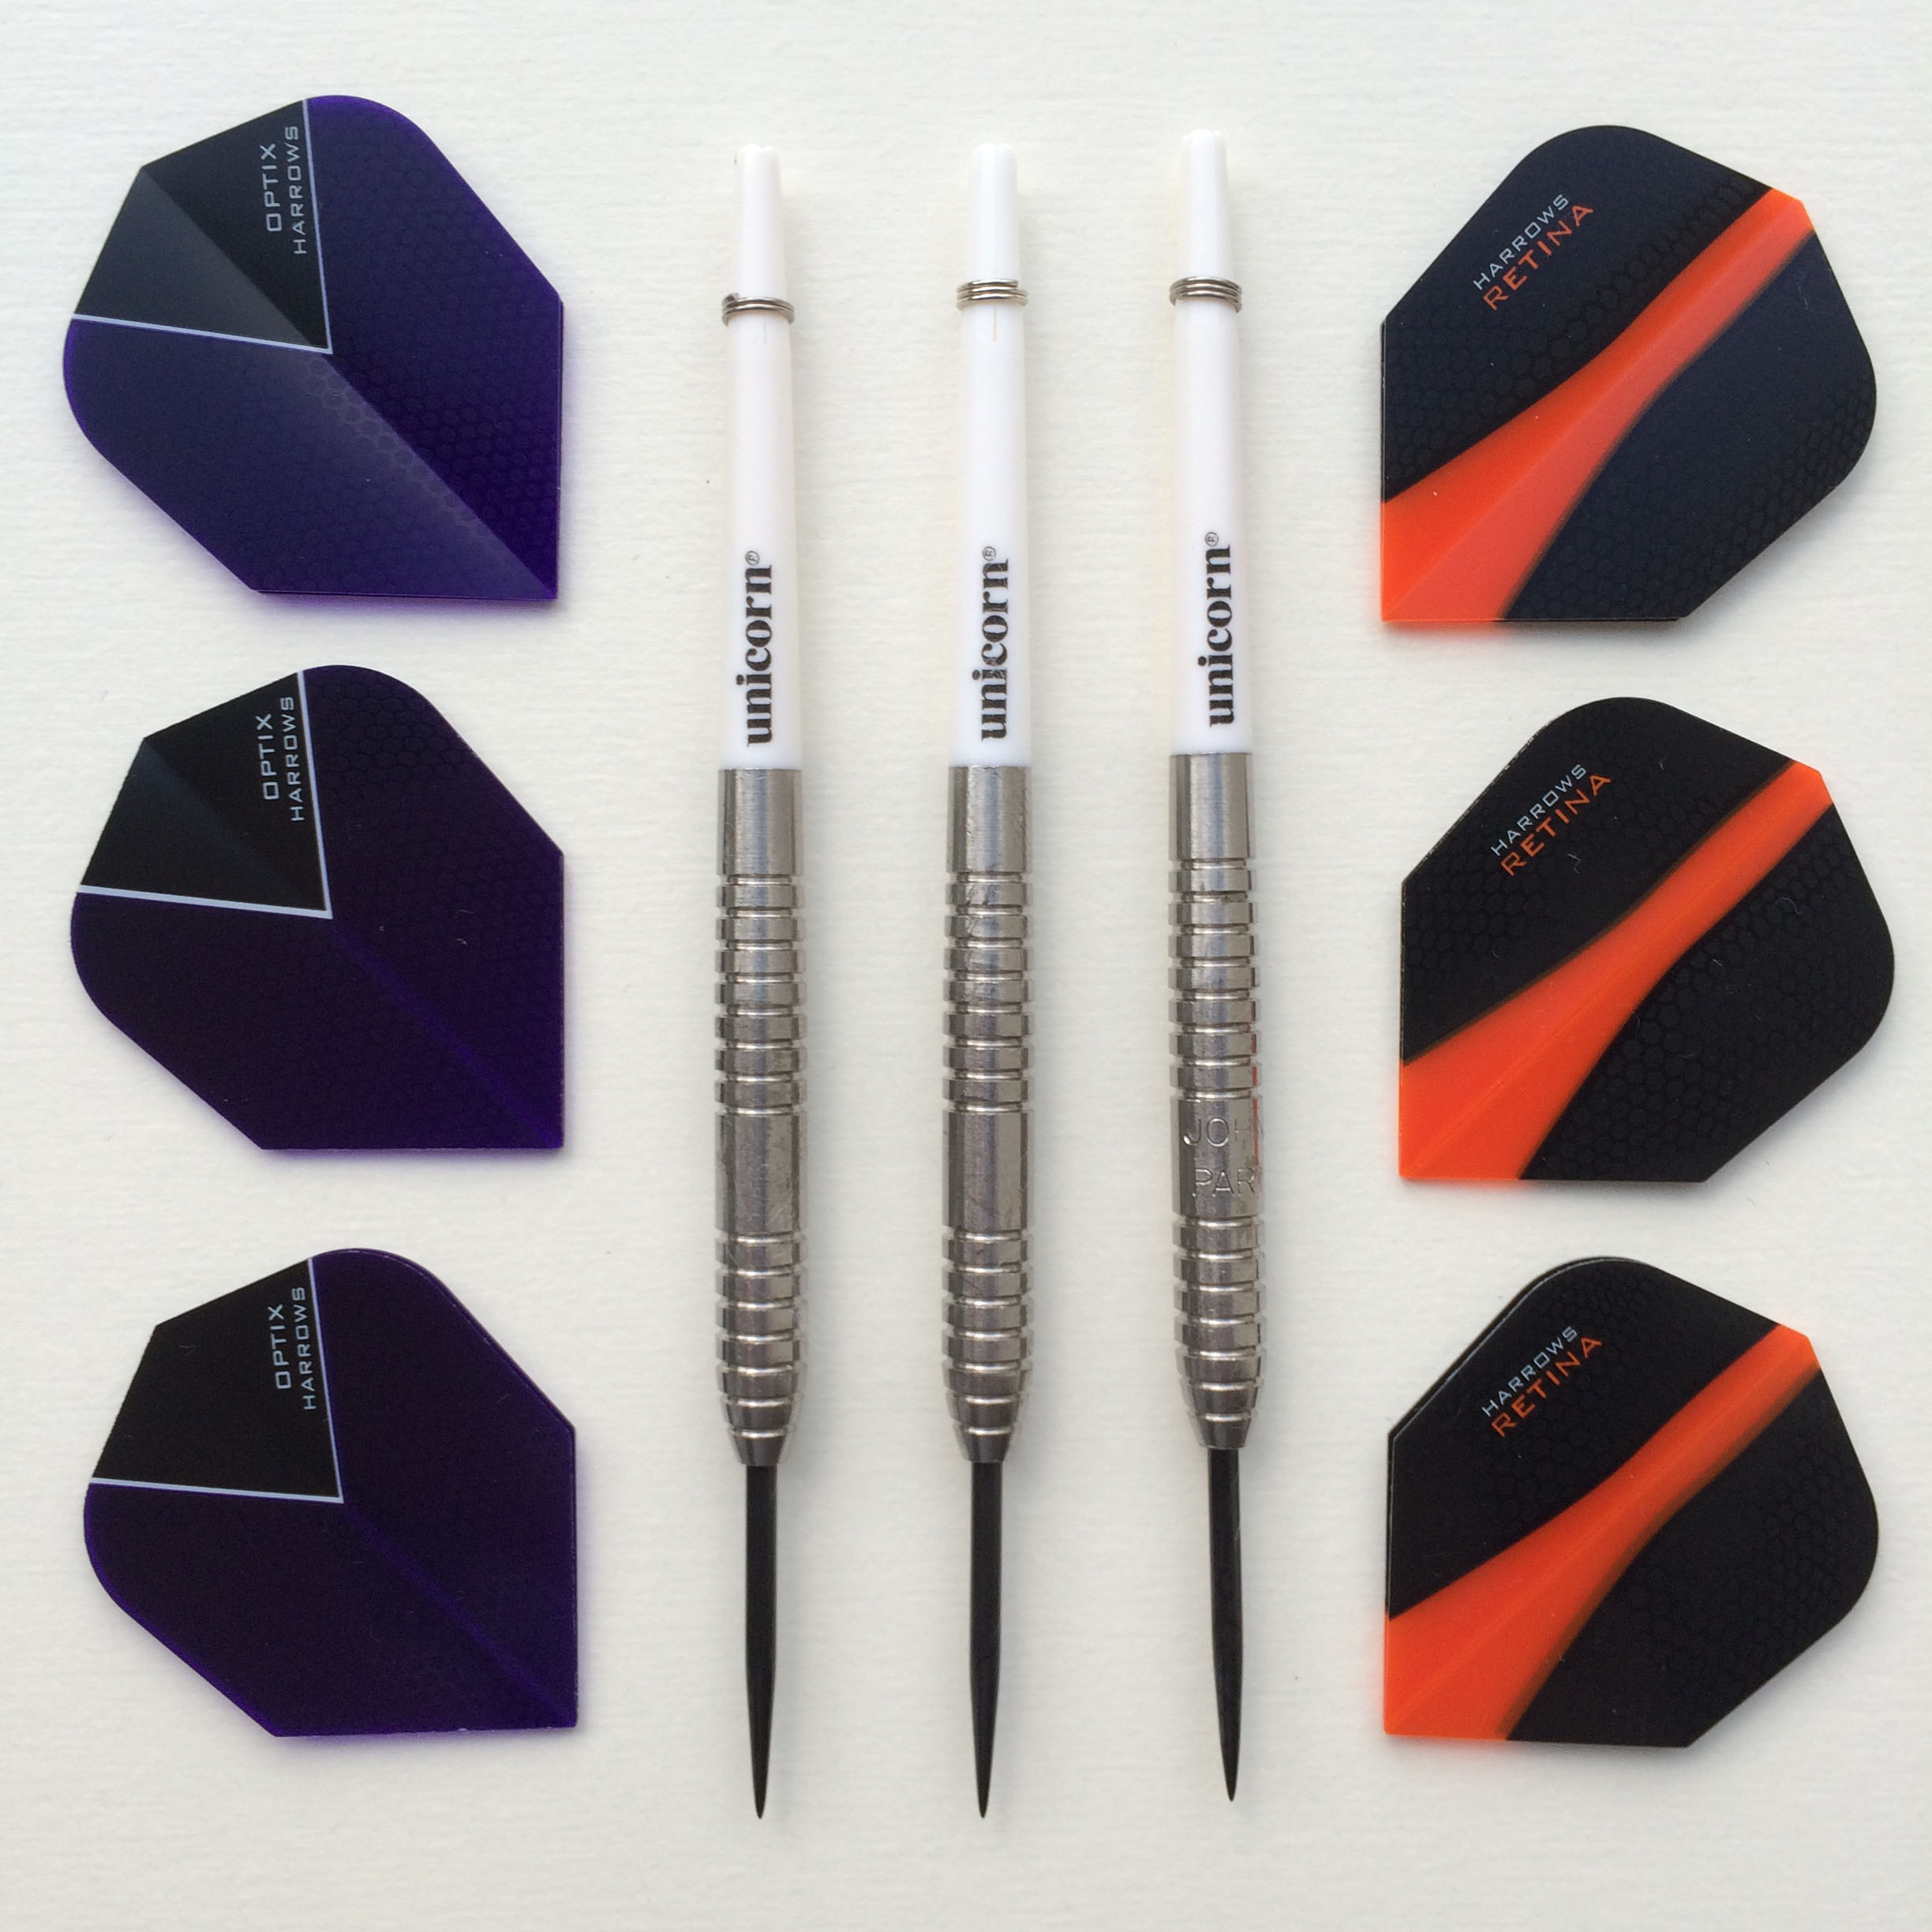 Mojo DARTS 🎯 on Twitter: B&amp;W PART NEW! Slight scuffing on the barrels, hence low price on these https://t.co/NKlPsyzzHd https://t.co/aISoXrNVCG" / Twitter